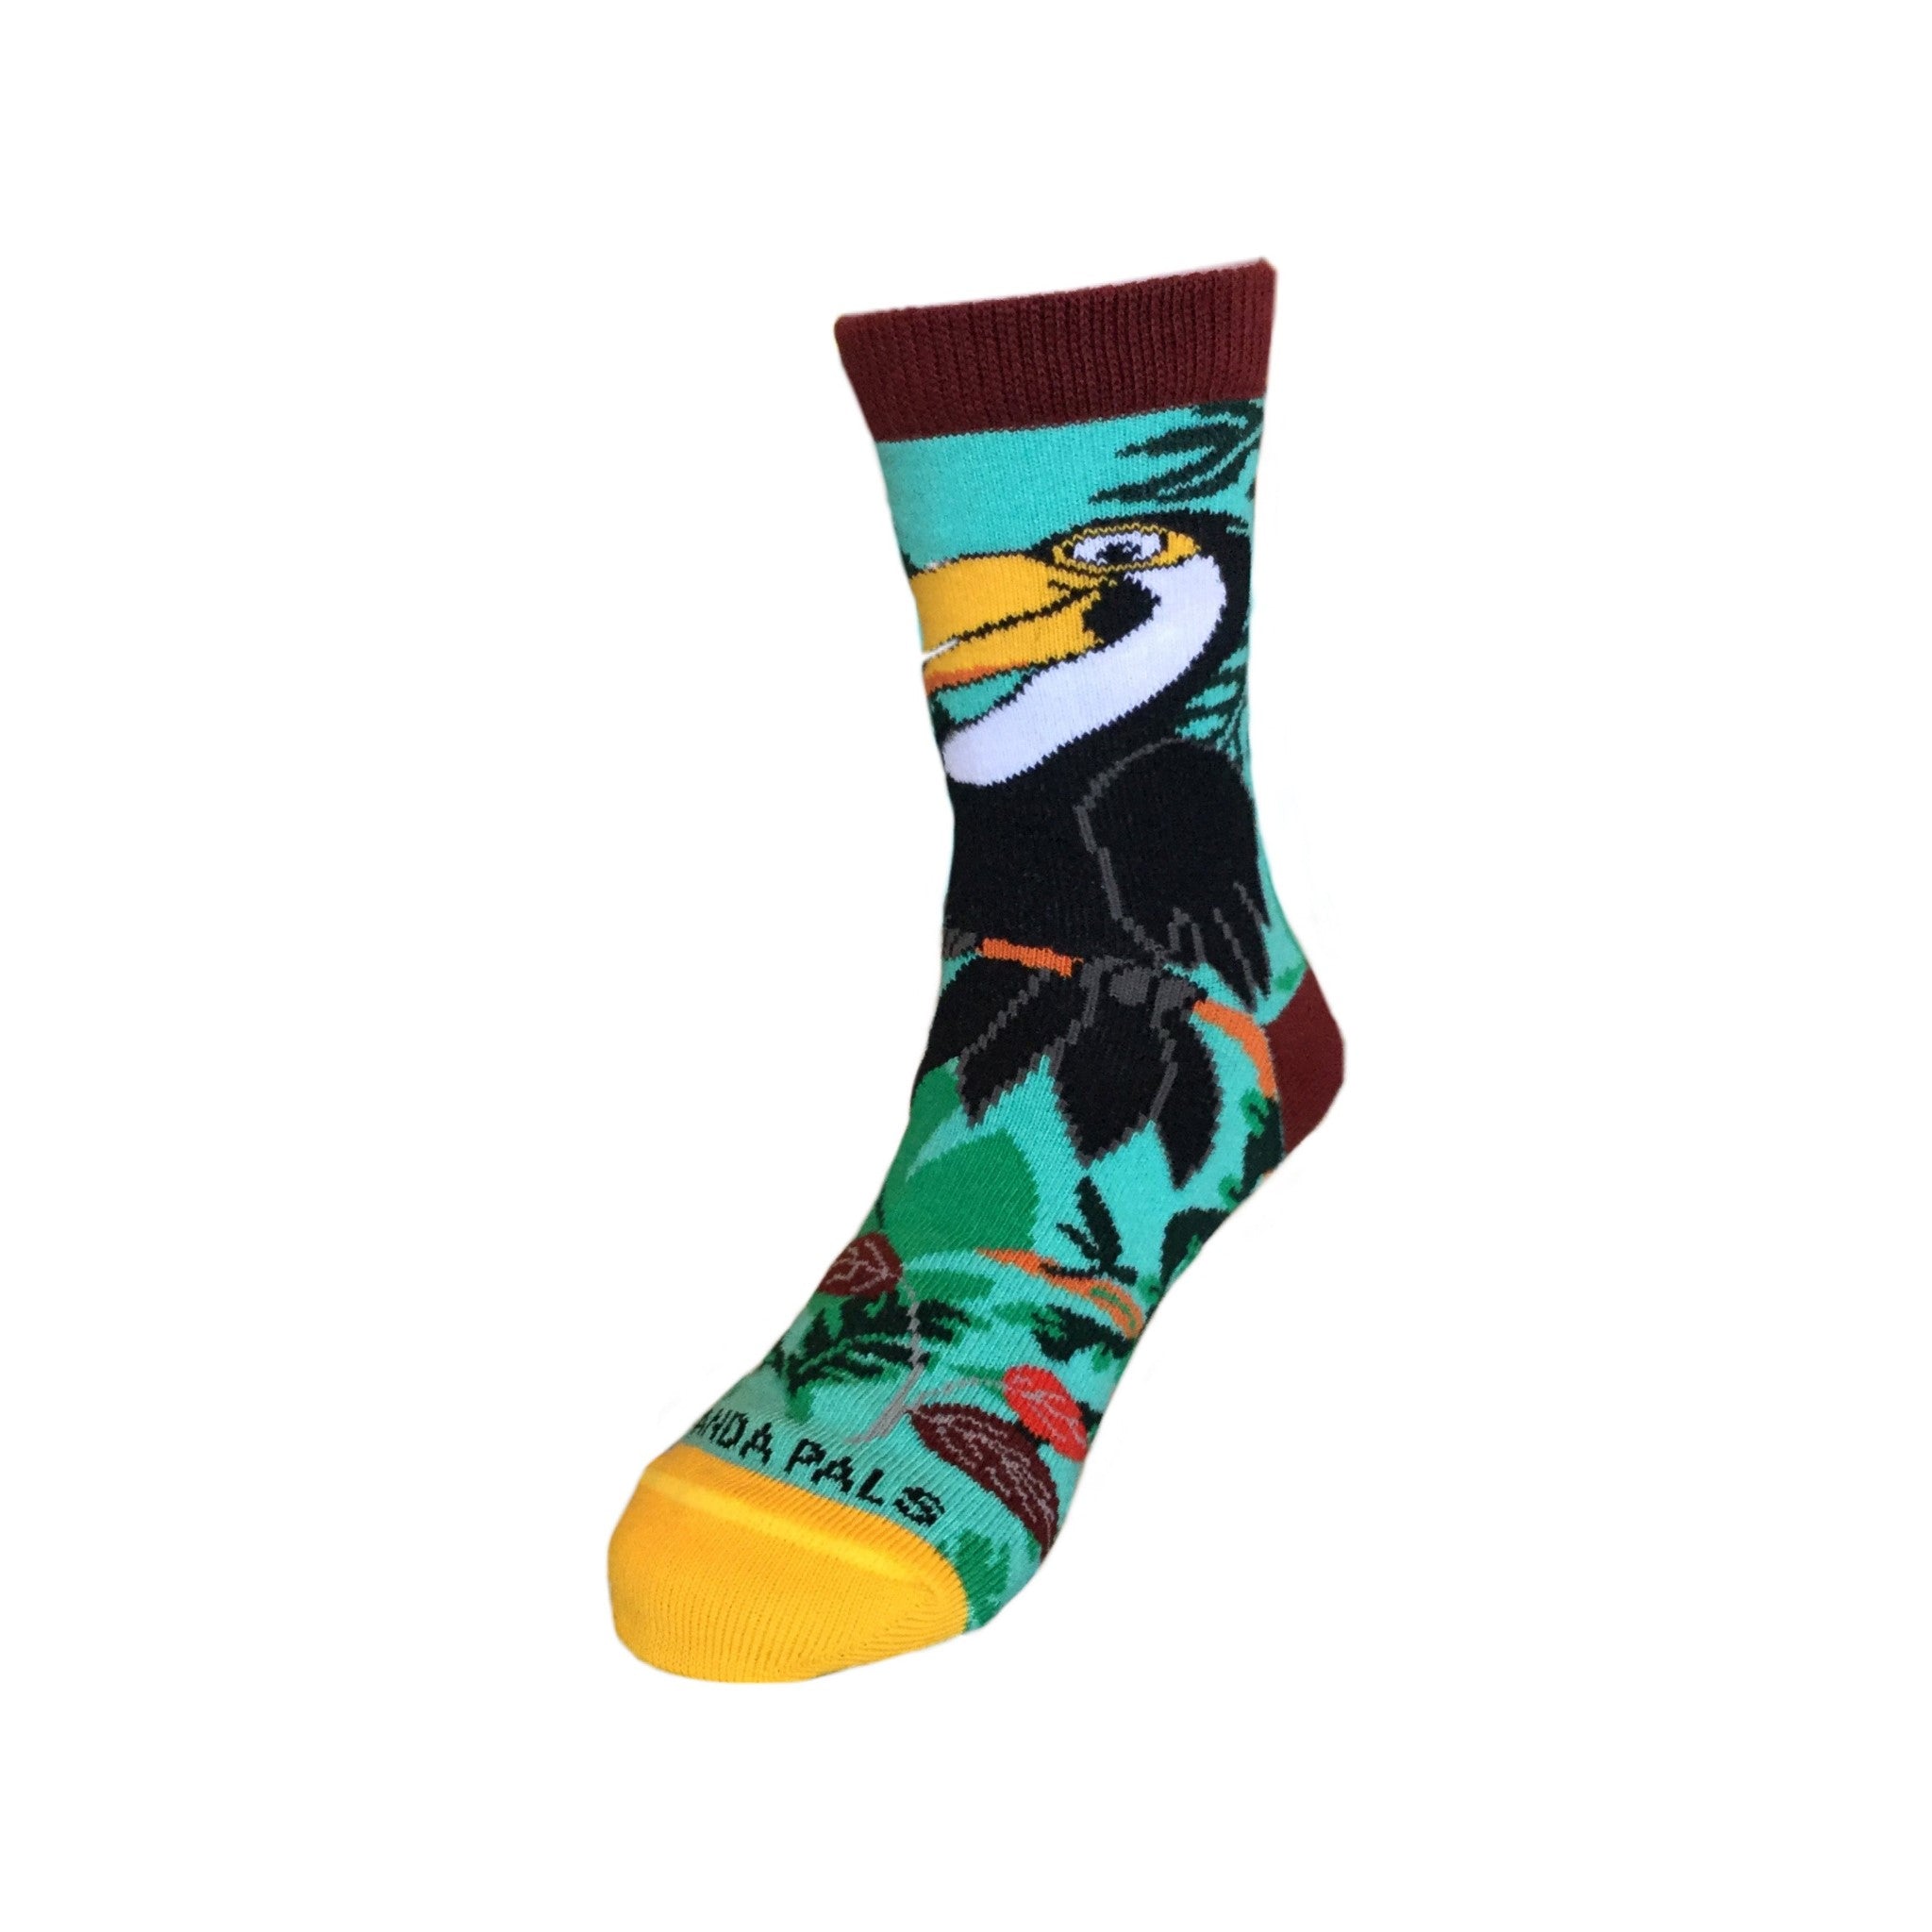 Playful Toucan Socks (Ages 3-7) from the Sock Panda